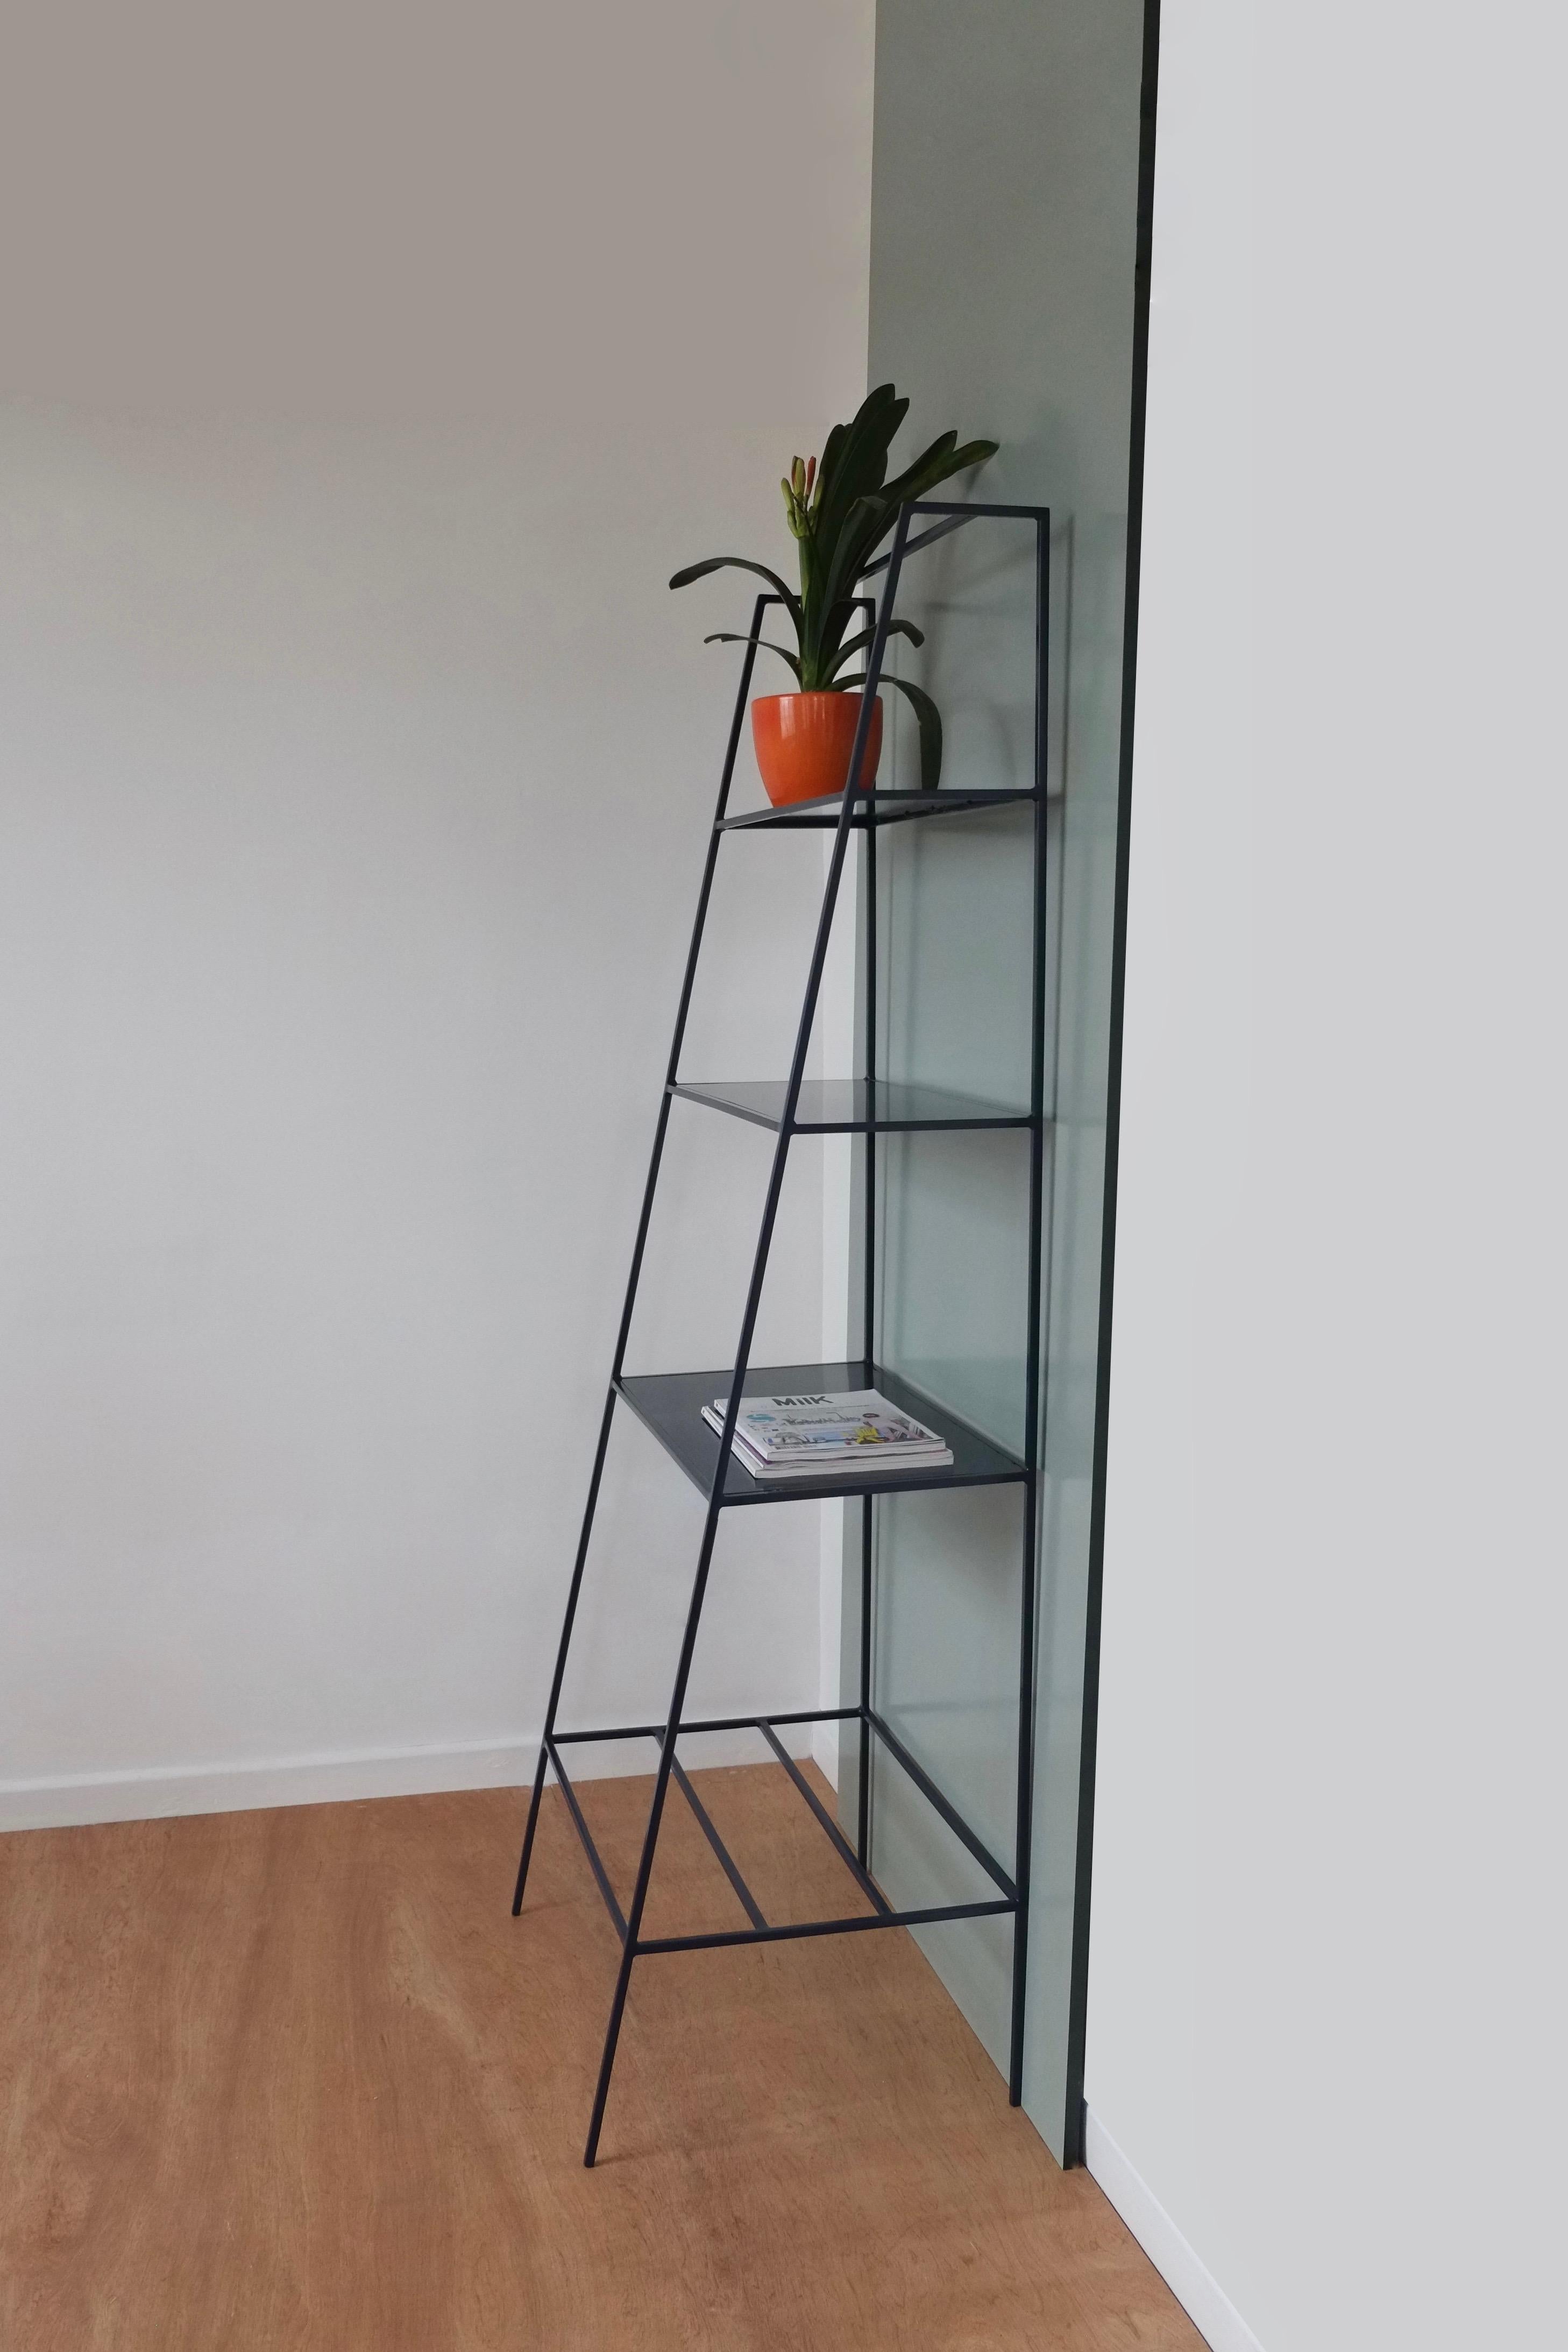 Steel Room Divider, Minimal Metal Shelving - Customisable In New Condition For Sale In Leicester, GB